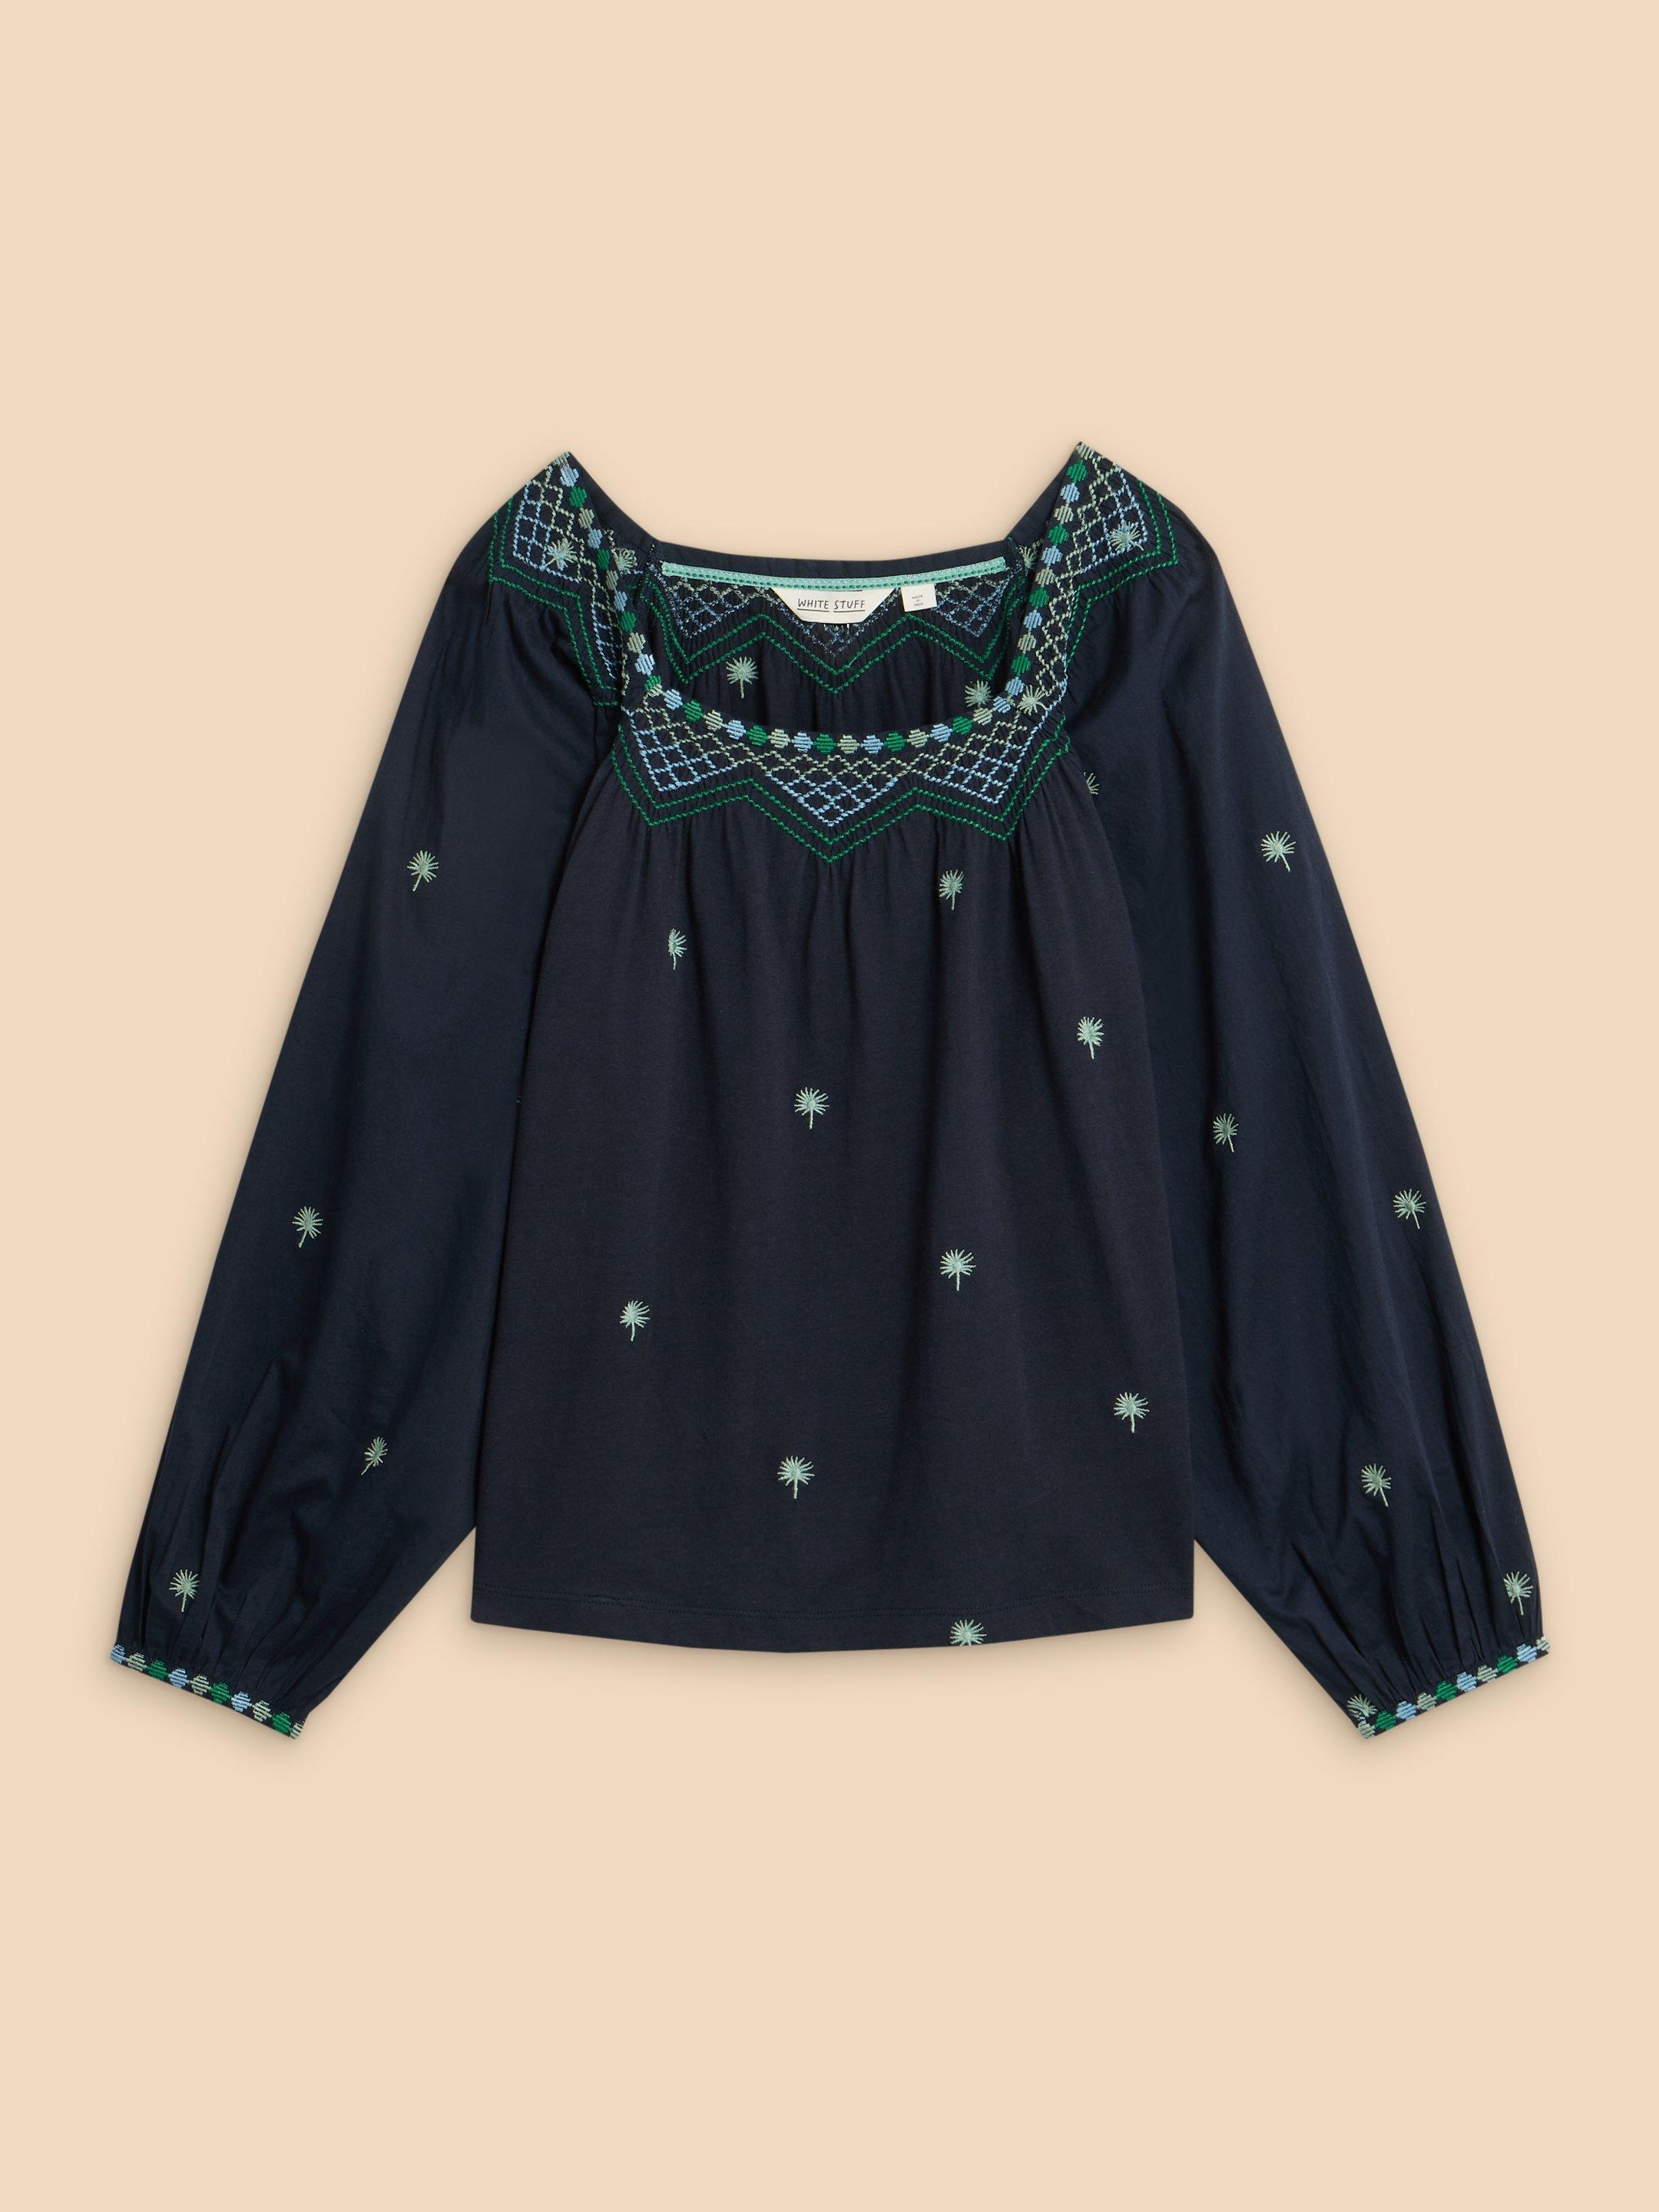 TILLY SMOCK TOP in NAVY MULTI - FLAT FRONT